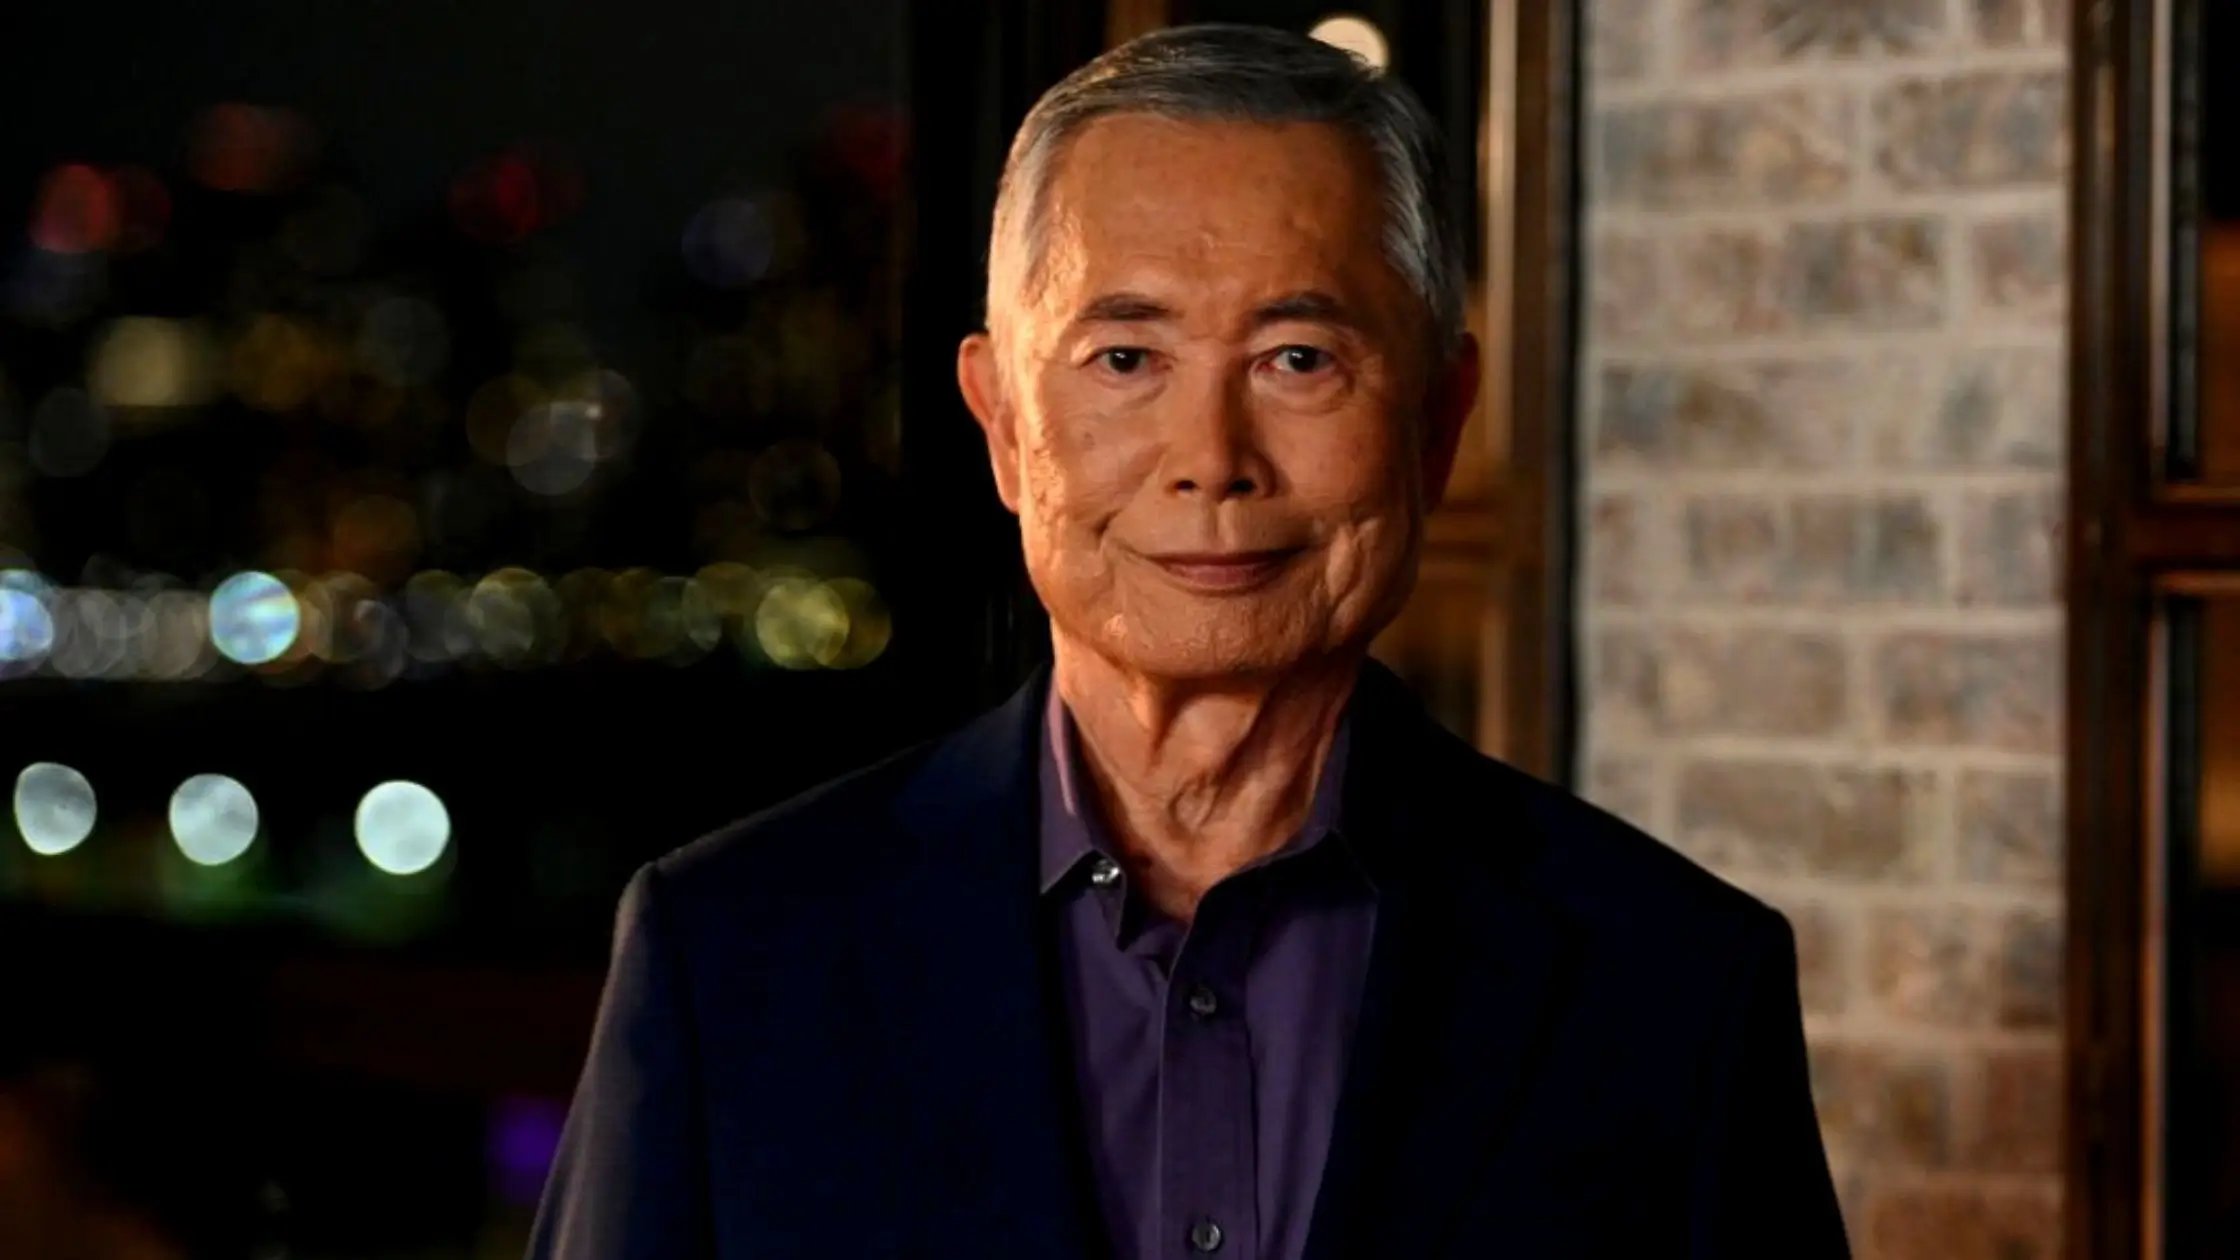 The Star Wars Actor George Takei Disclosed Why He Came Out As Gay At 68 Years Old